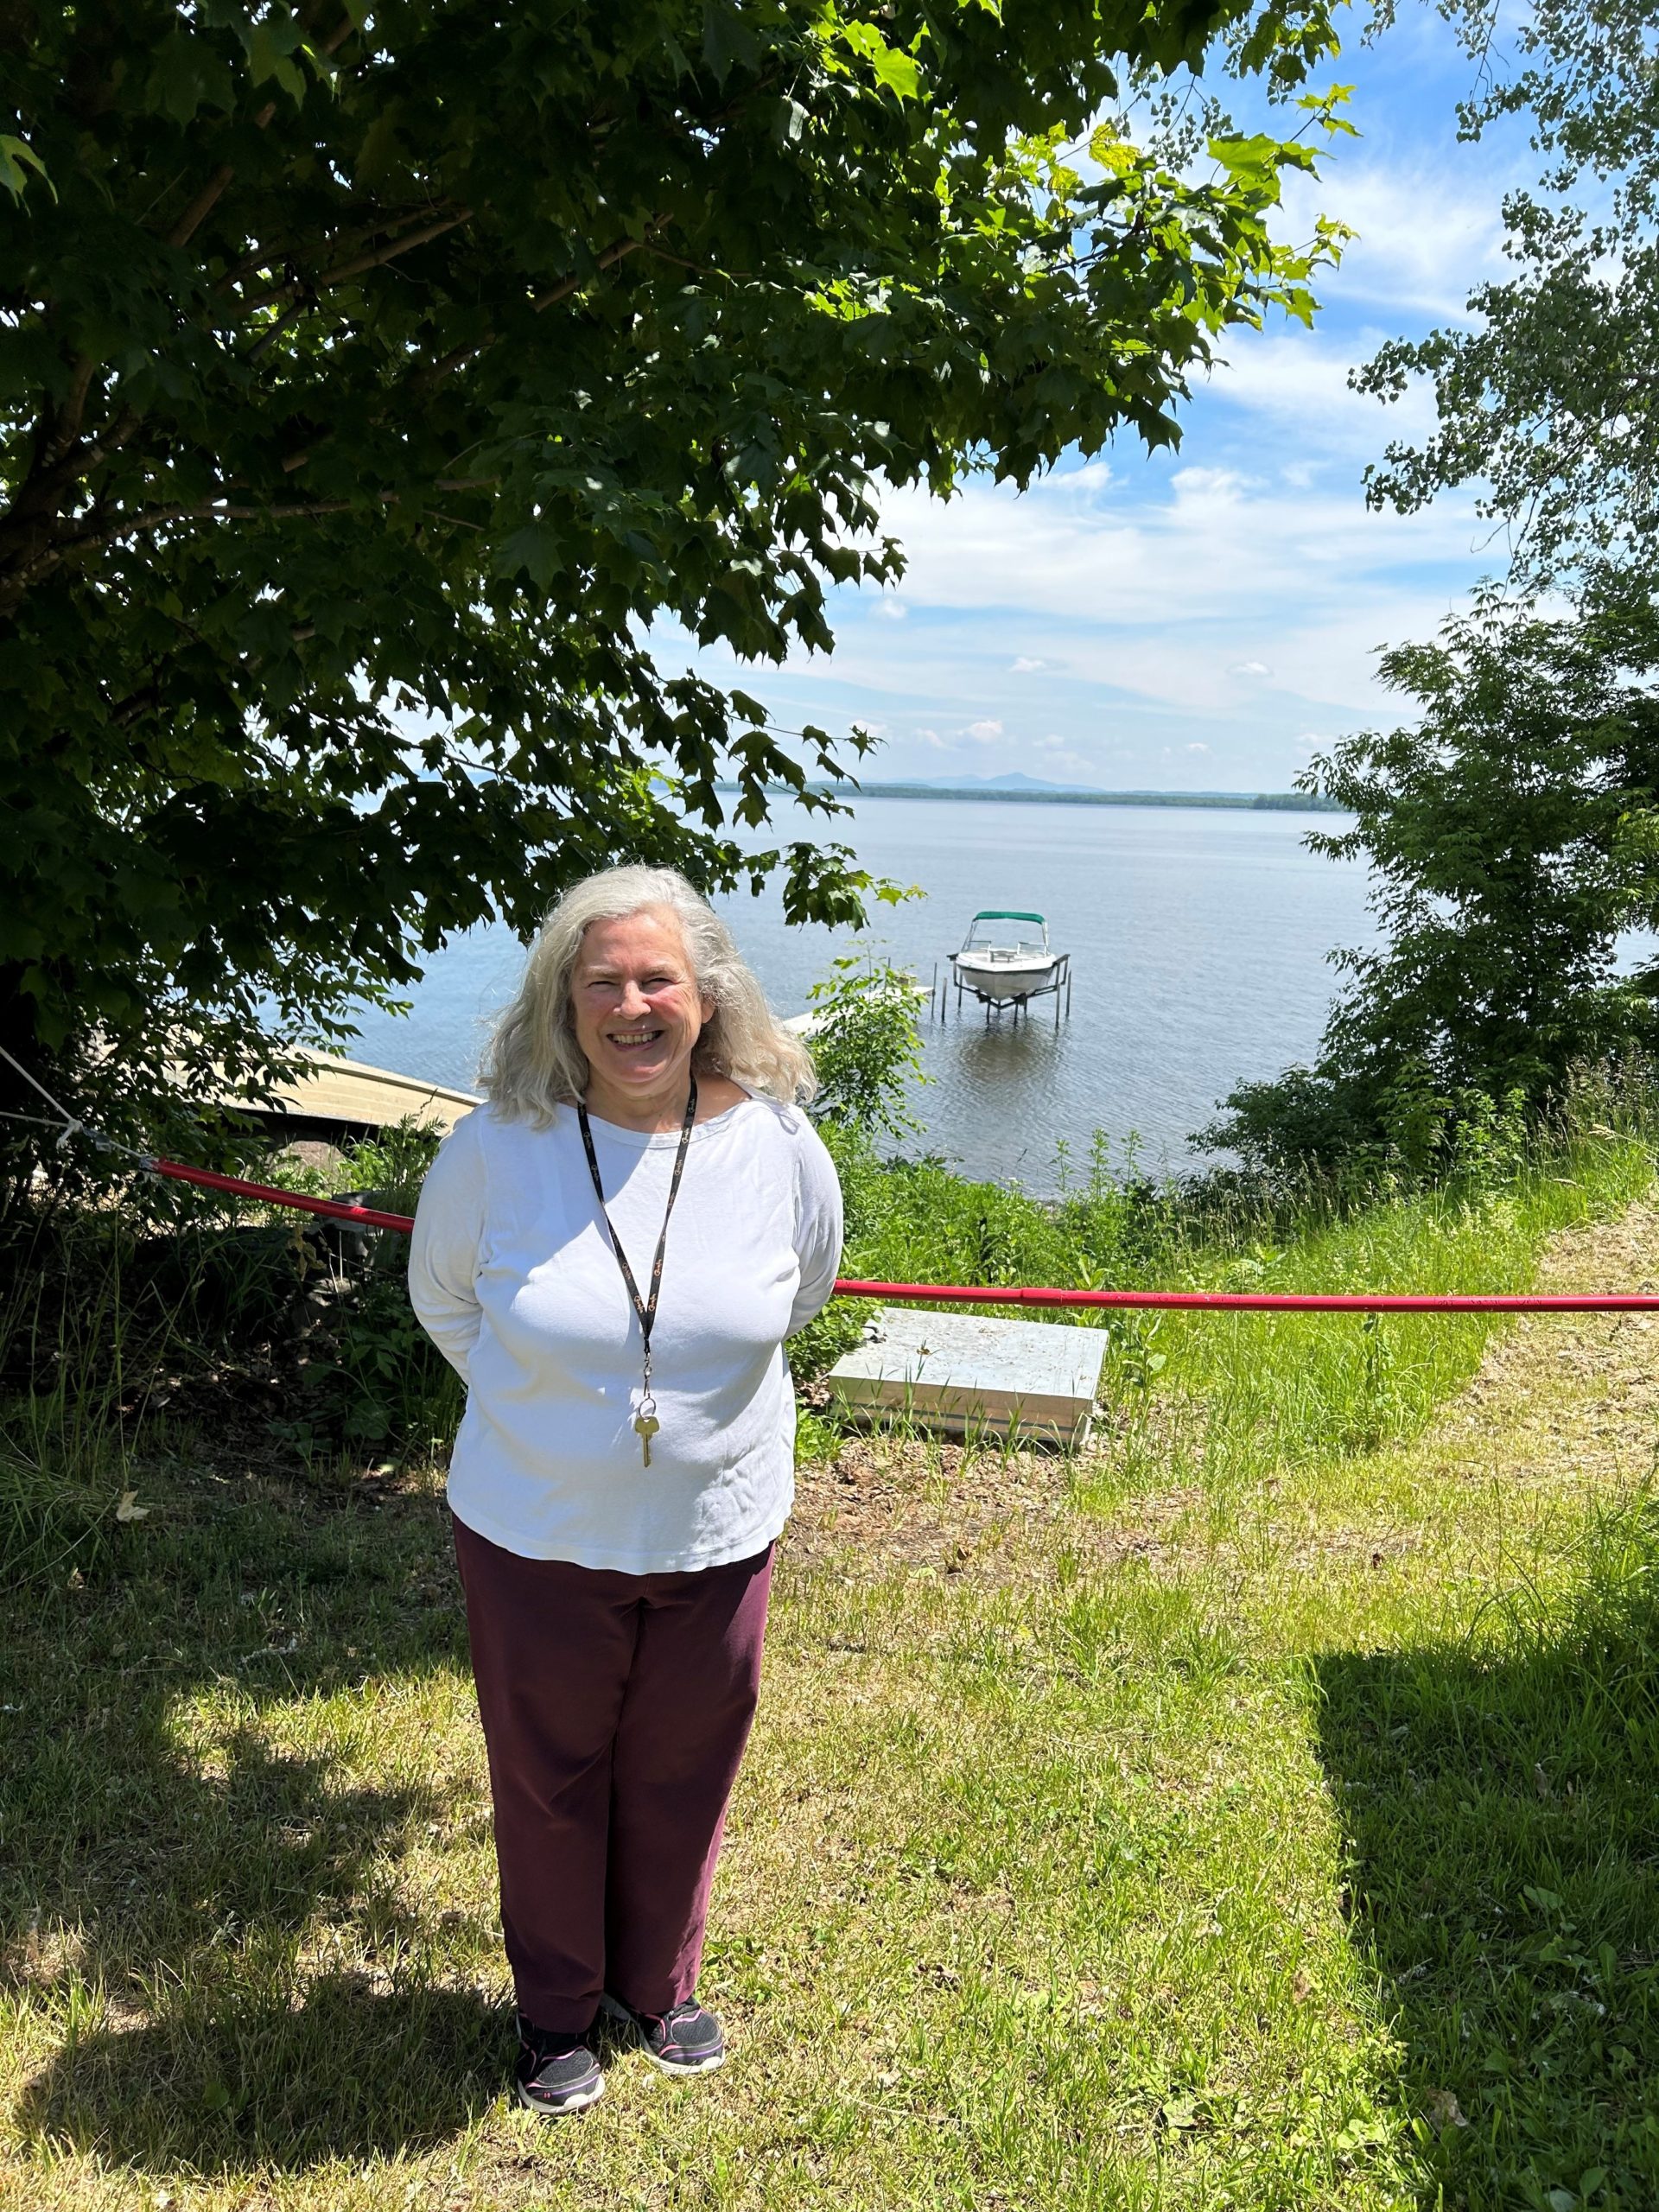 A woman with gray hair stands in front of a lake on a sunny day. There is a dock with a boat next to it in the distance.